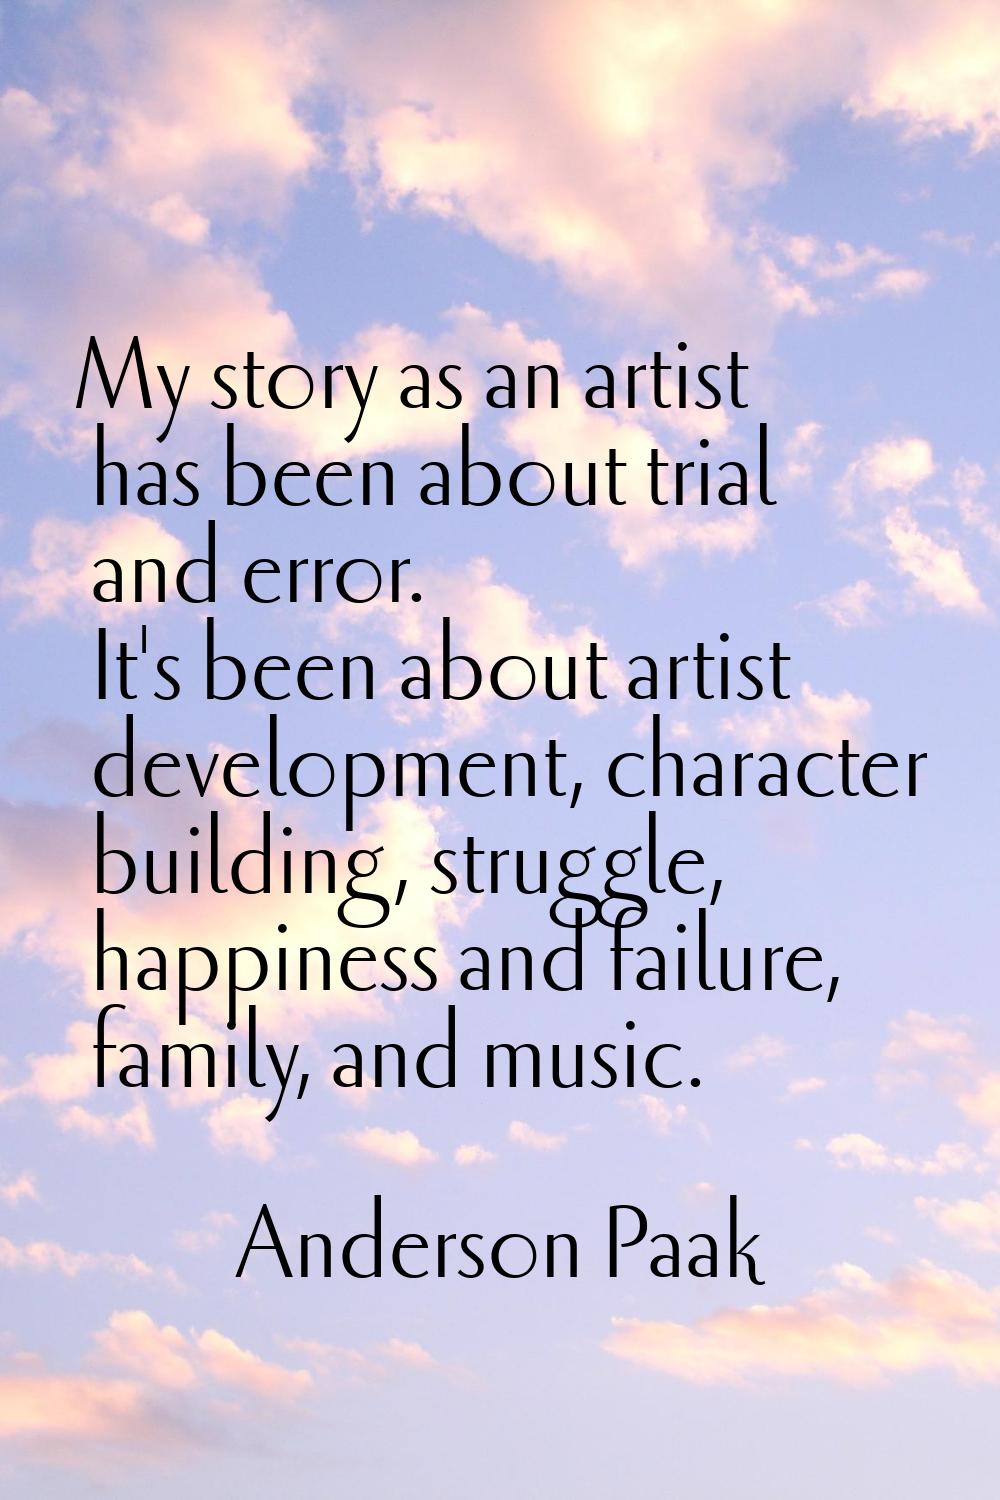 My story as an artist has been about trial and error. It's been about artist development, character